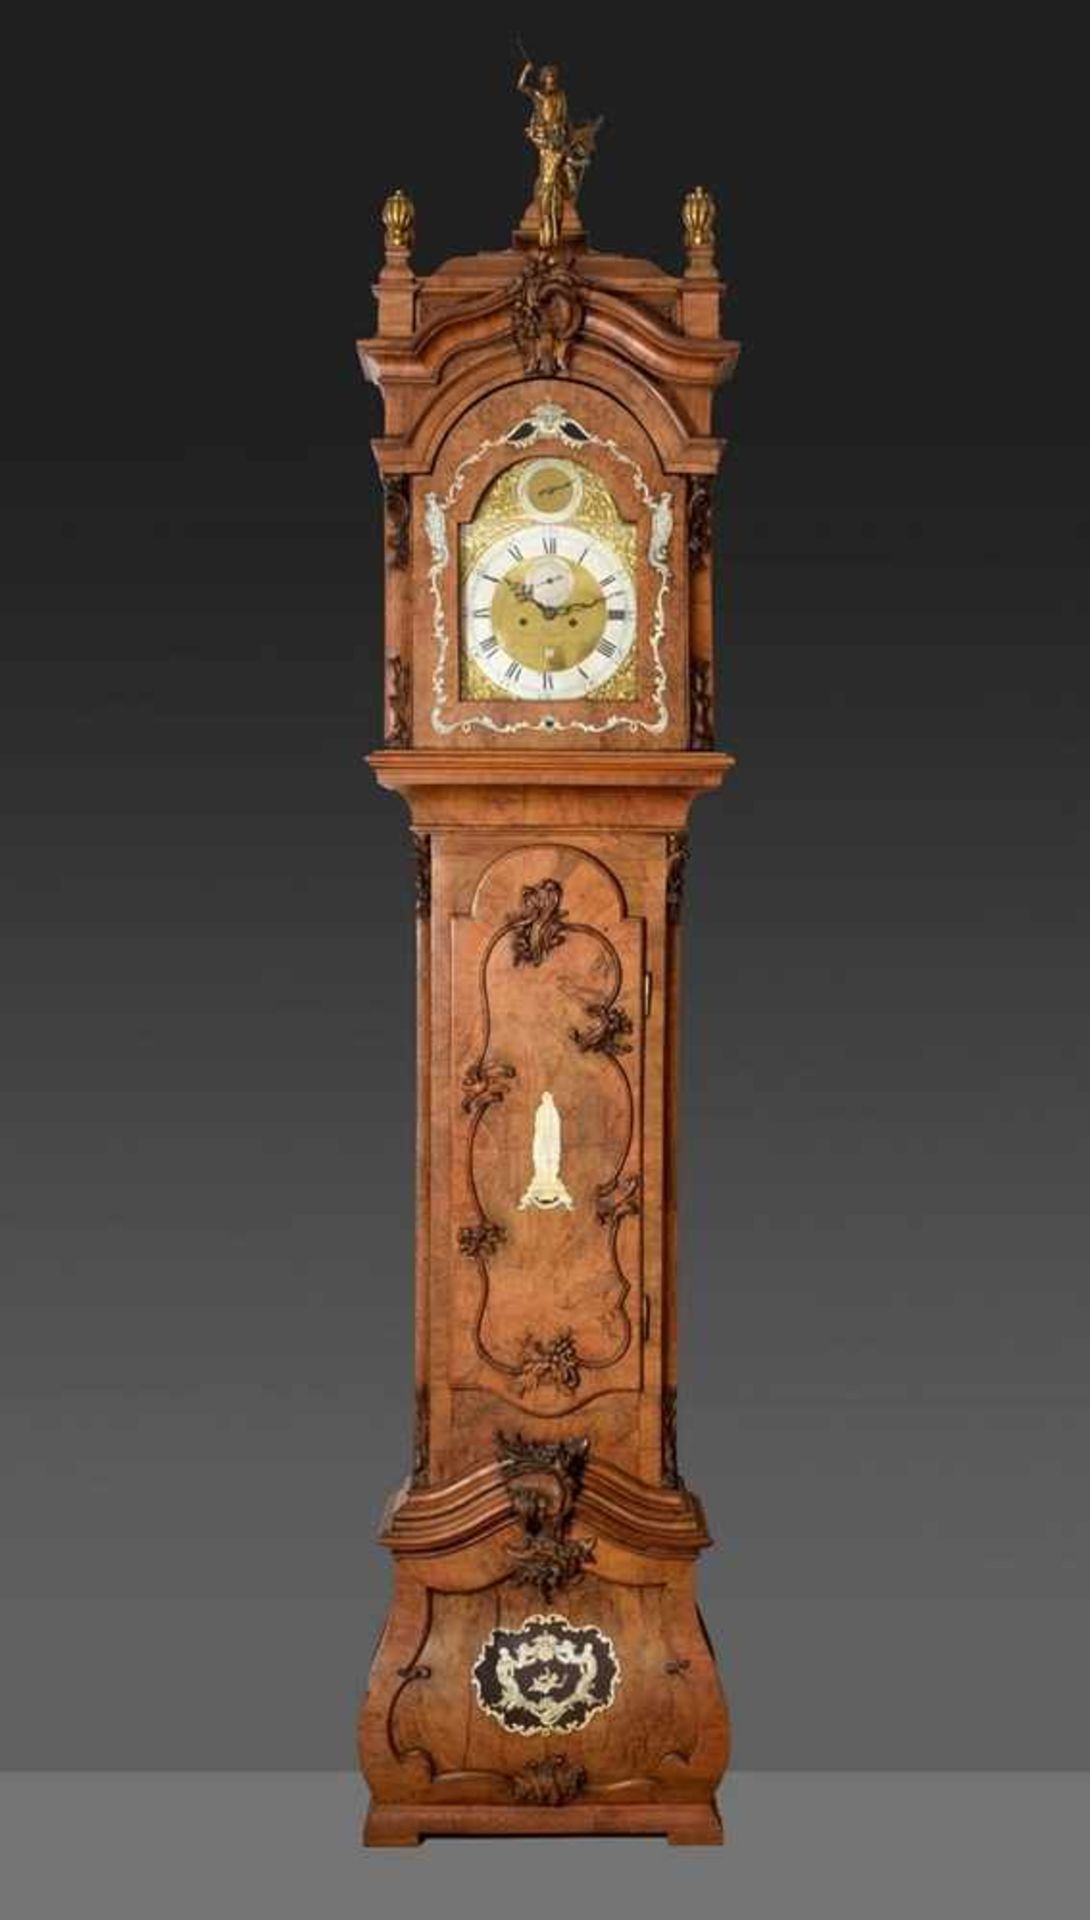 Large rococo grandfather clock with figural ivory inlays and rocaille carvings, walnut veneer, 8-day